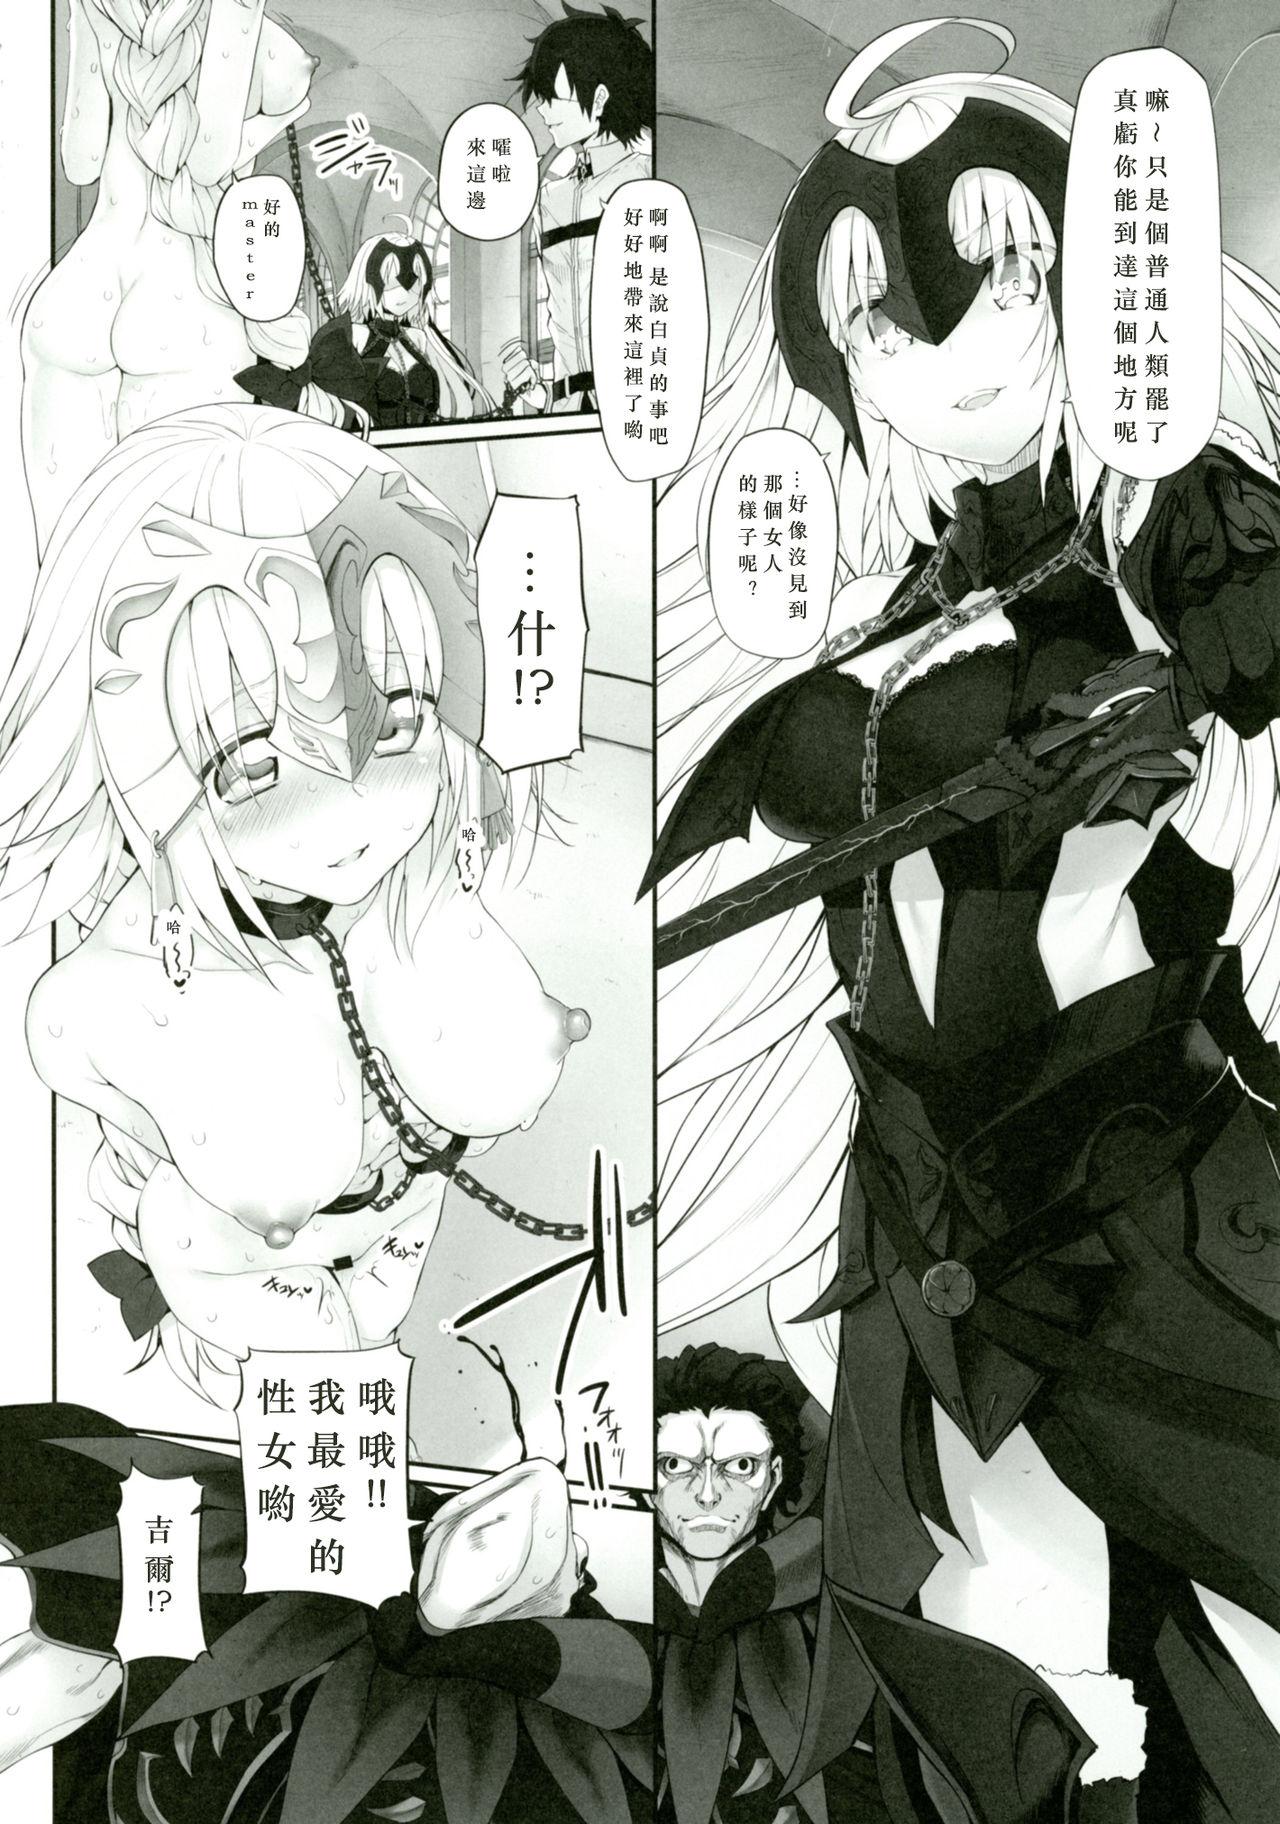 Lover Marked Girls Vol. 14 - Fate grand order Sharing - Page 6